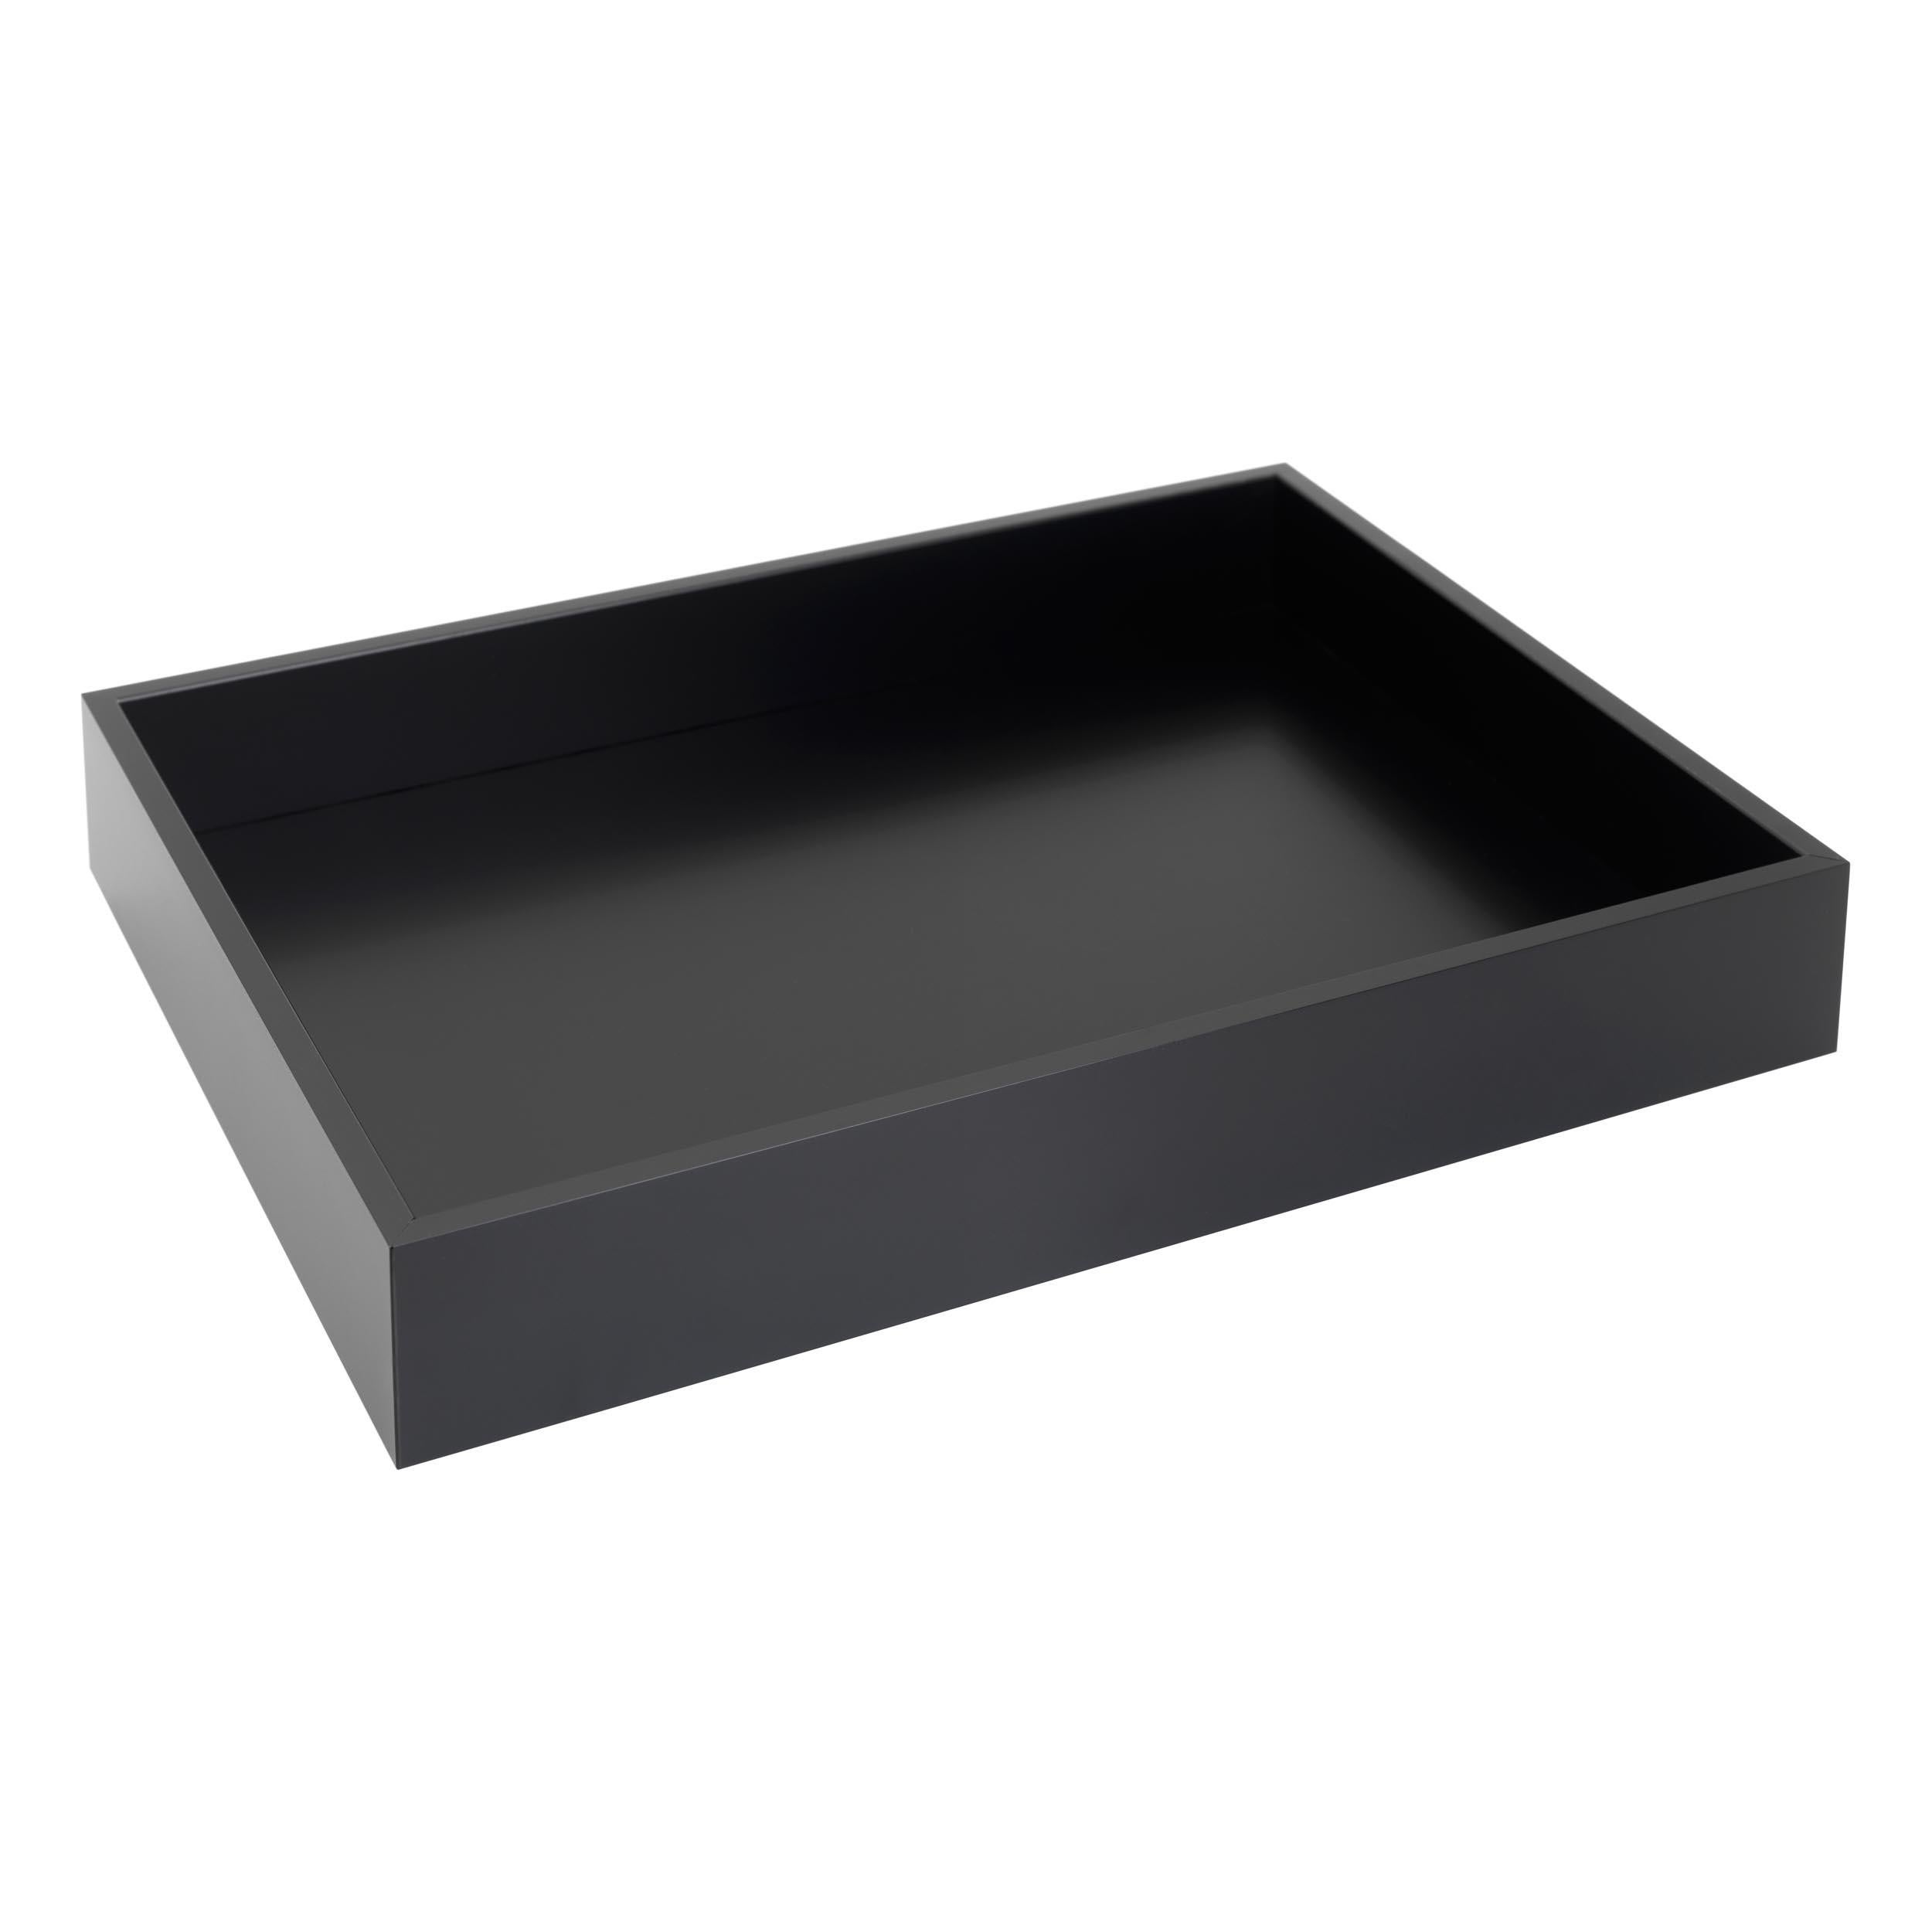 NEW Schonbuch Black Box M Tally
TALLY is a versatile tray and comes in a choice of interesting lacquer colours and three different sizes. Alone or in a group, side by side or one inside the other, TALLY offers inspiration for creative arrangements